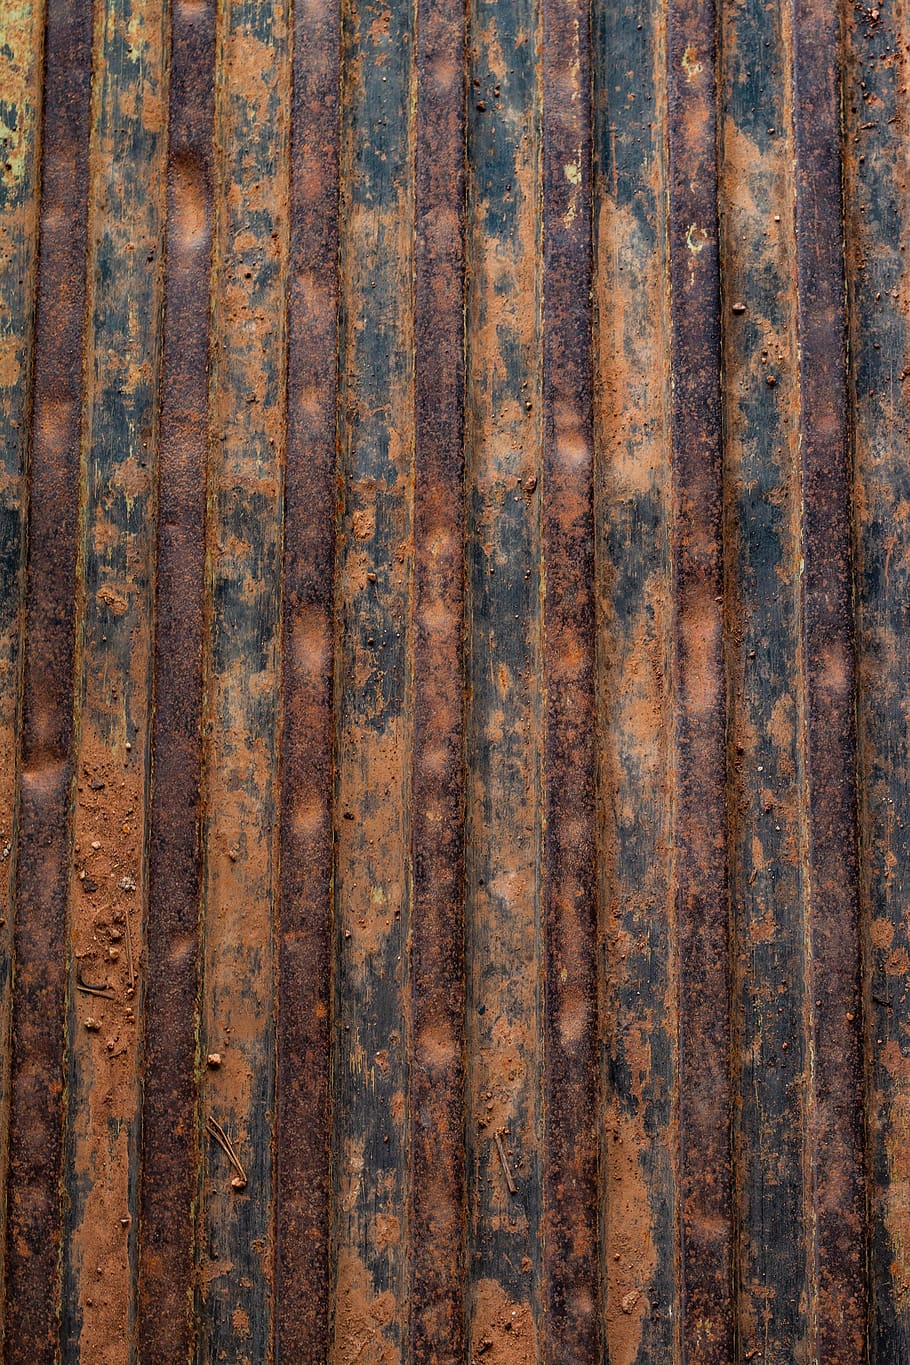 corten metal, red steel, iron, surface, rust, full frame, backgrounds, pattern, brown, rusty